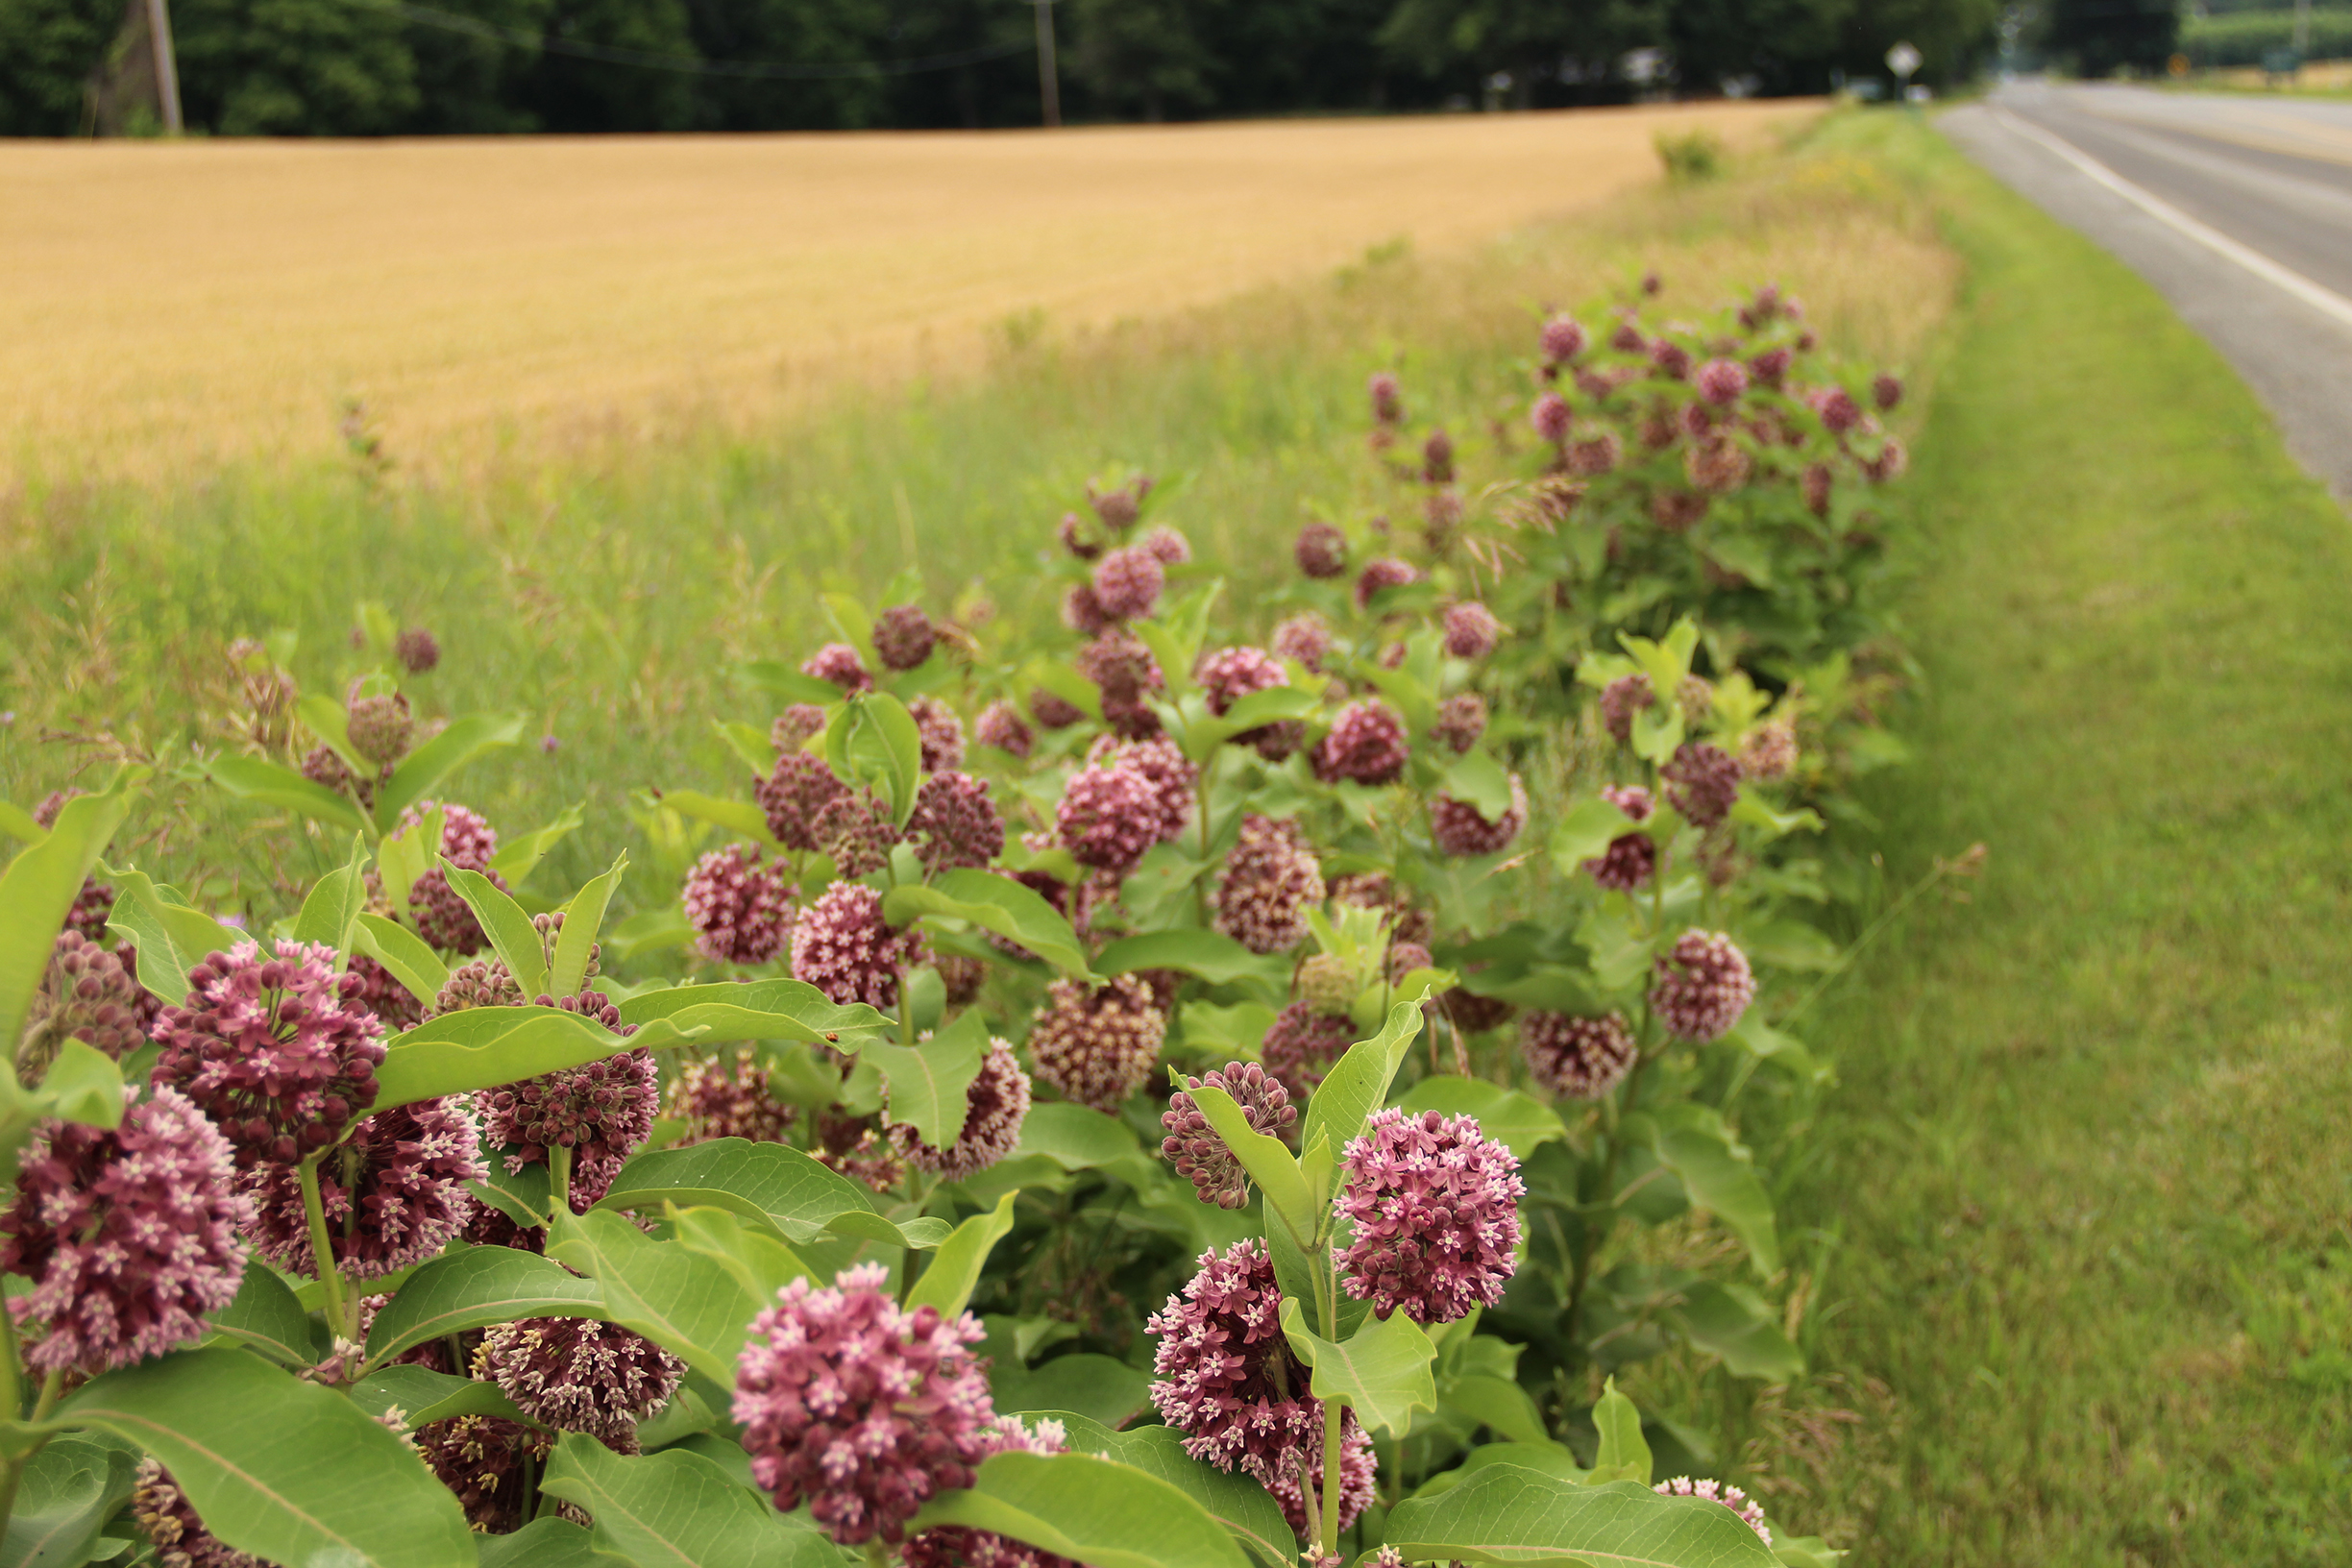 Ball-shaped, purple flower heads of the milkweed growing in a ditch add color to this rural roadside